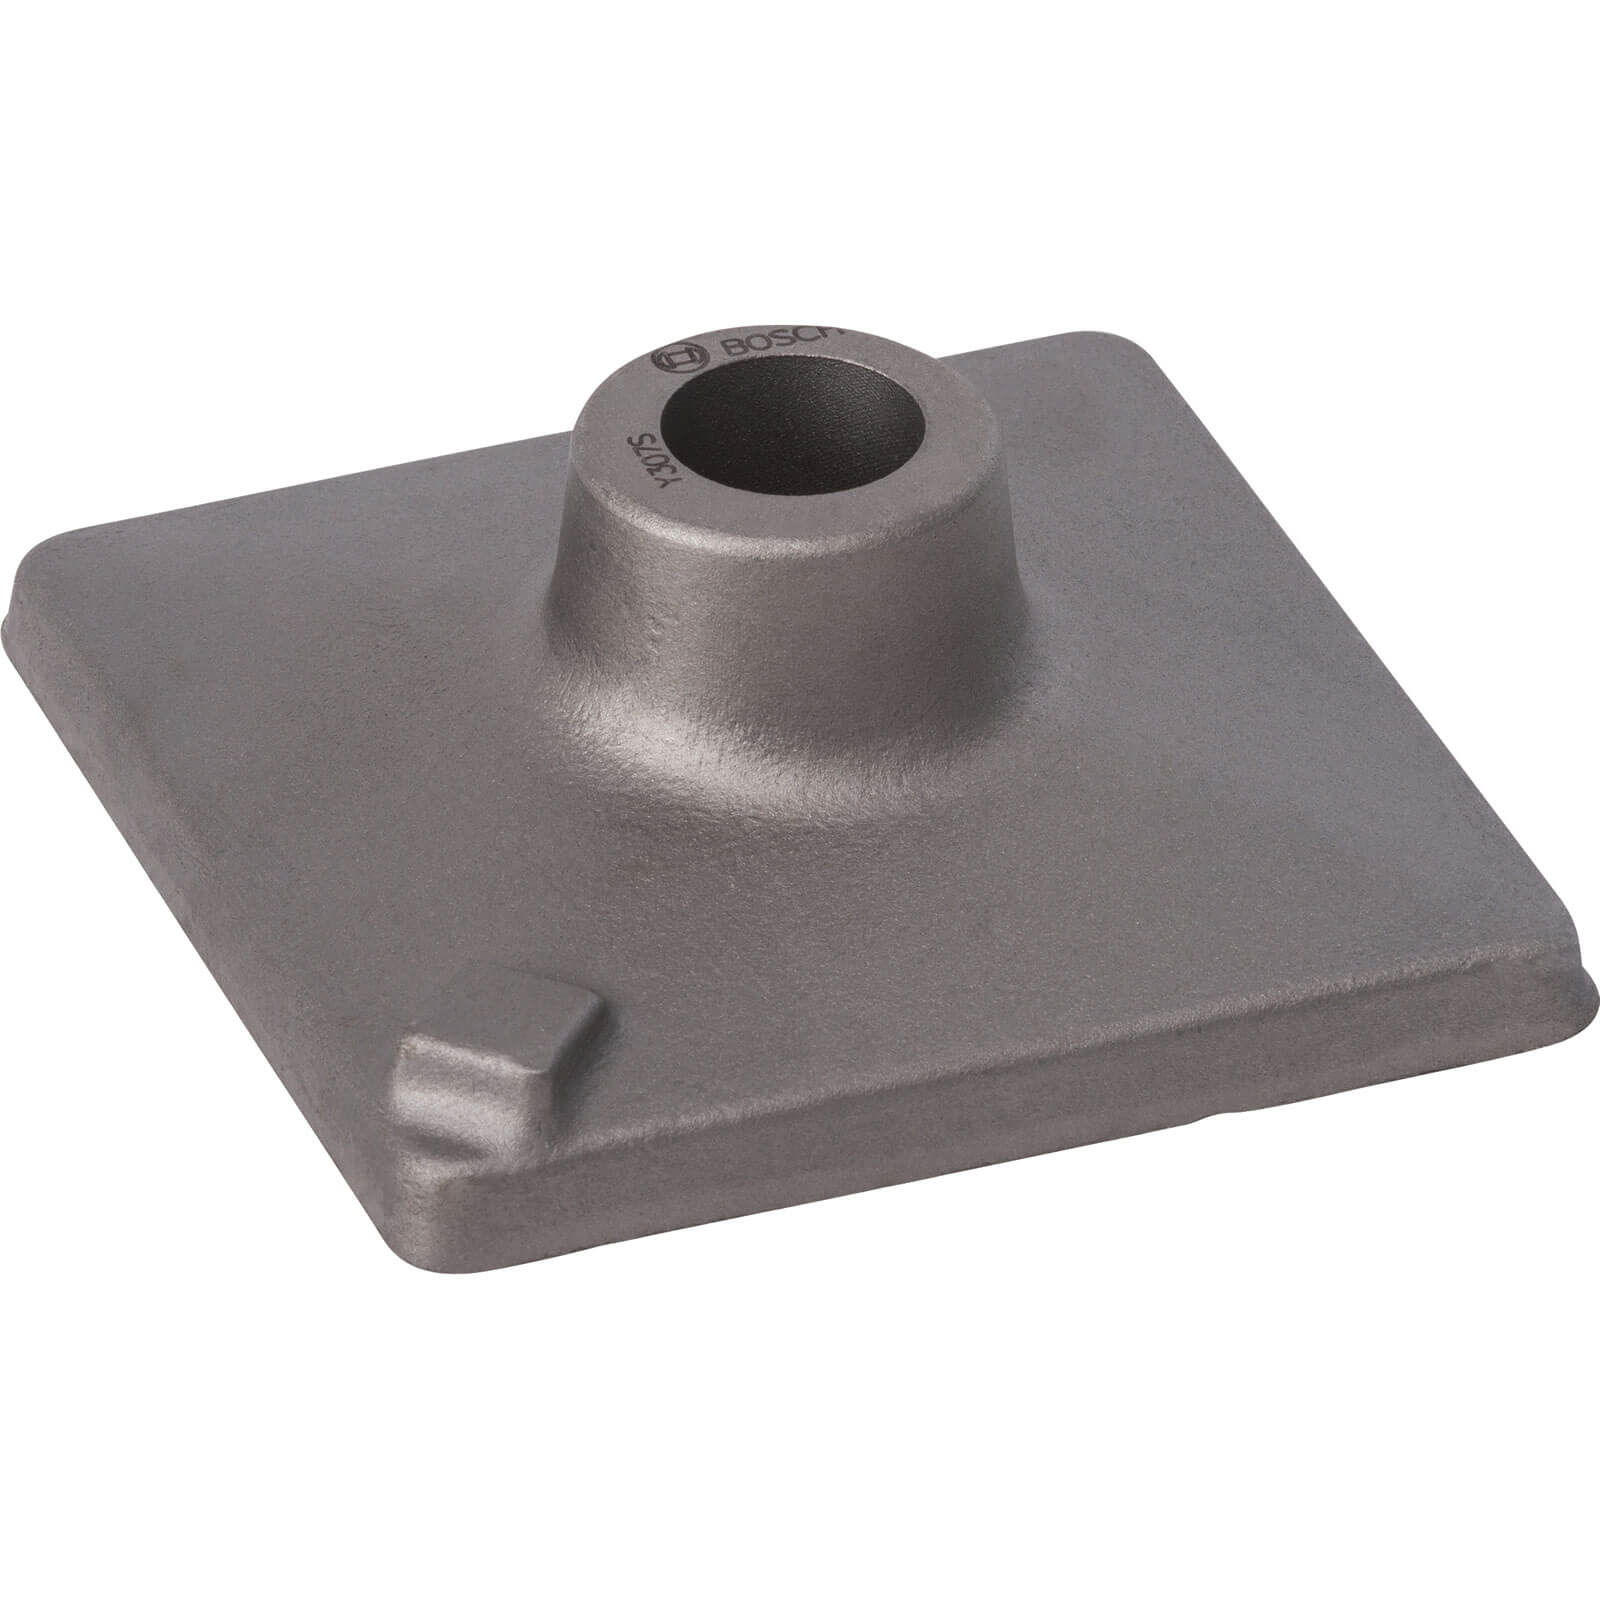 Photo of Bosch Sds Max 120mm X 120mm Tamping Plate